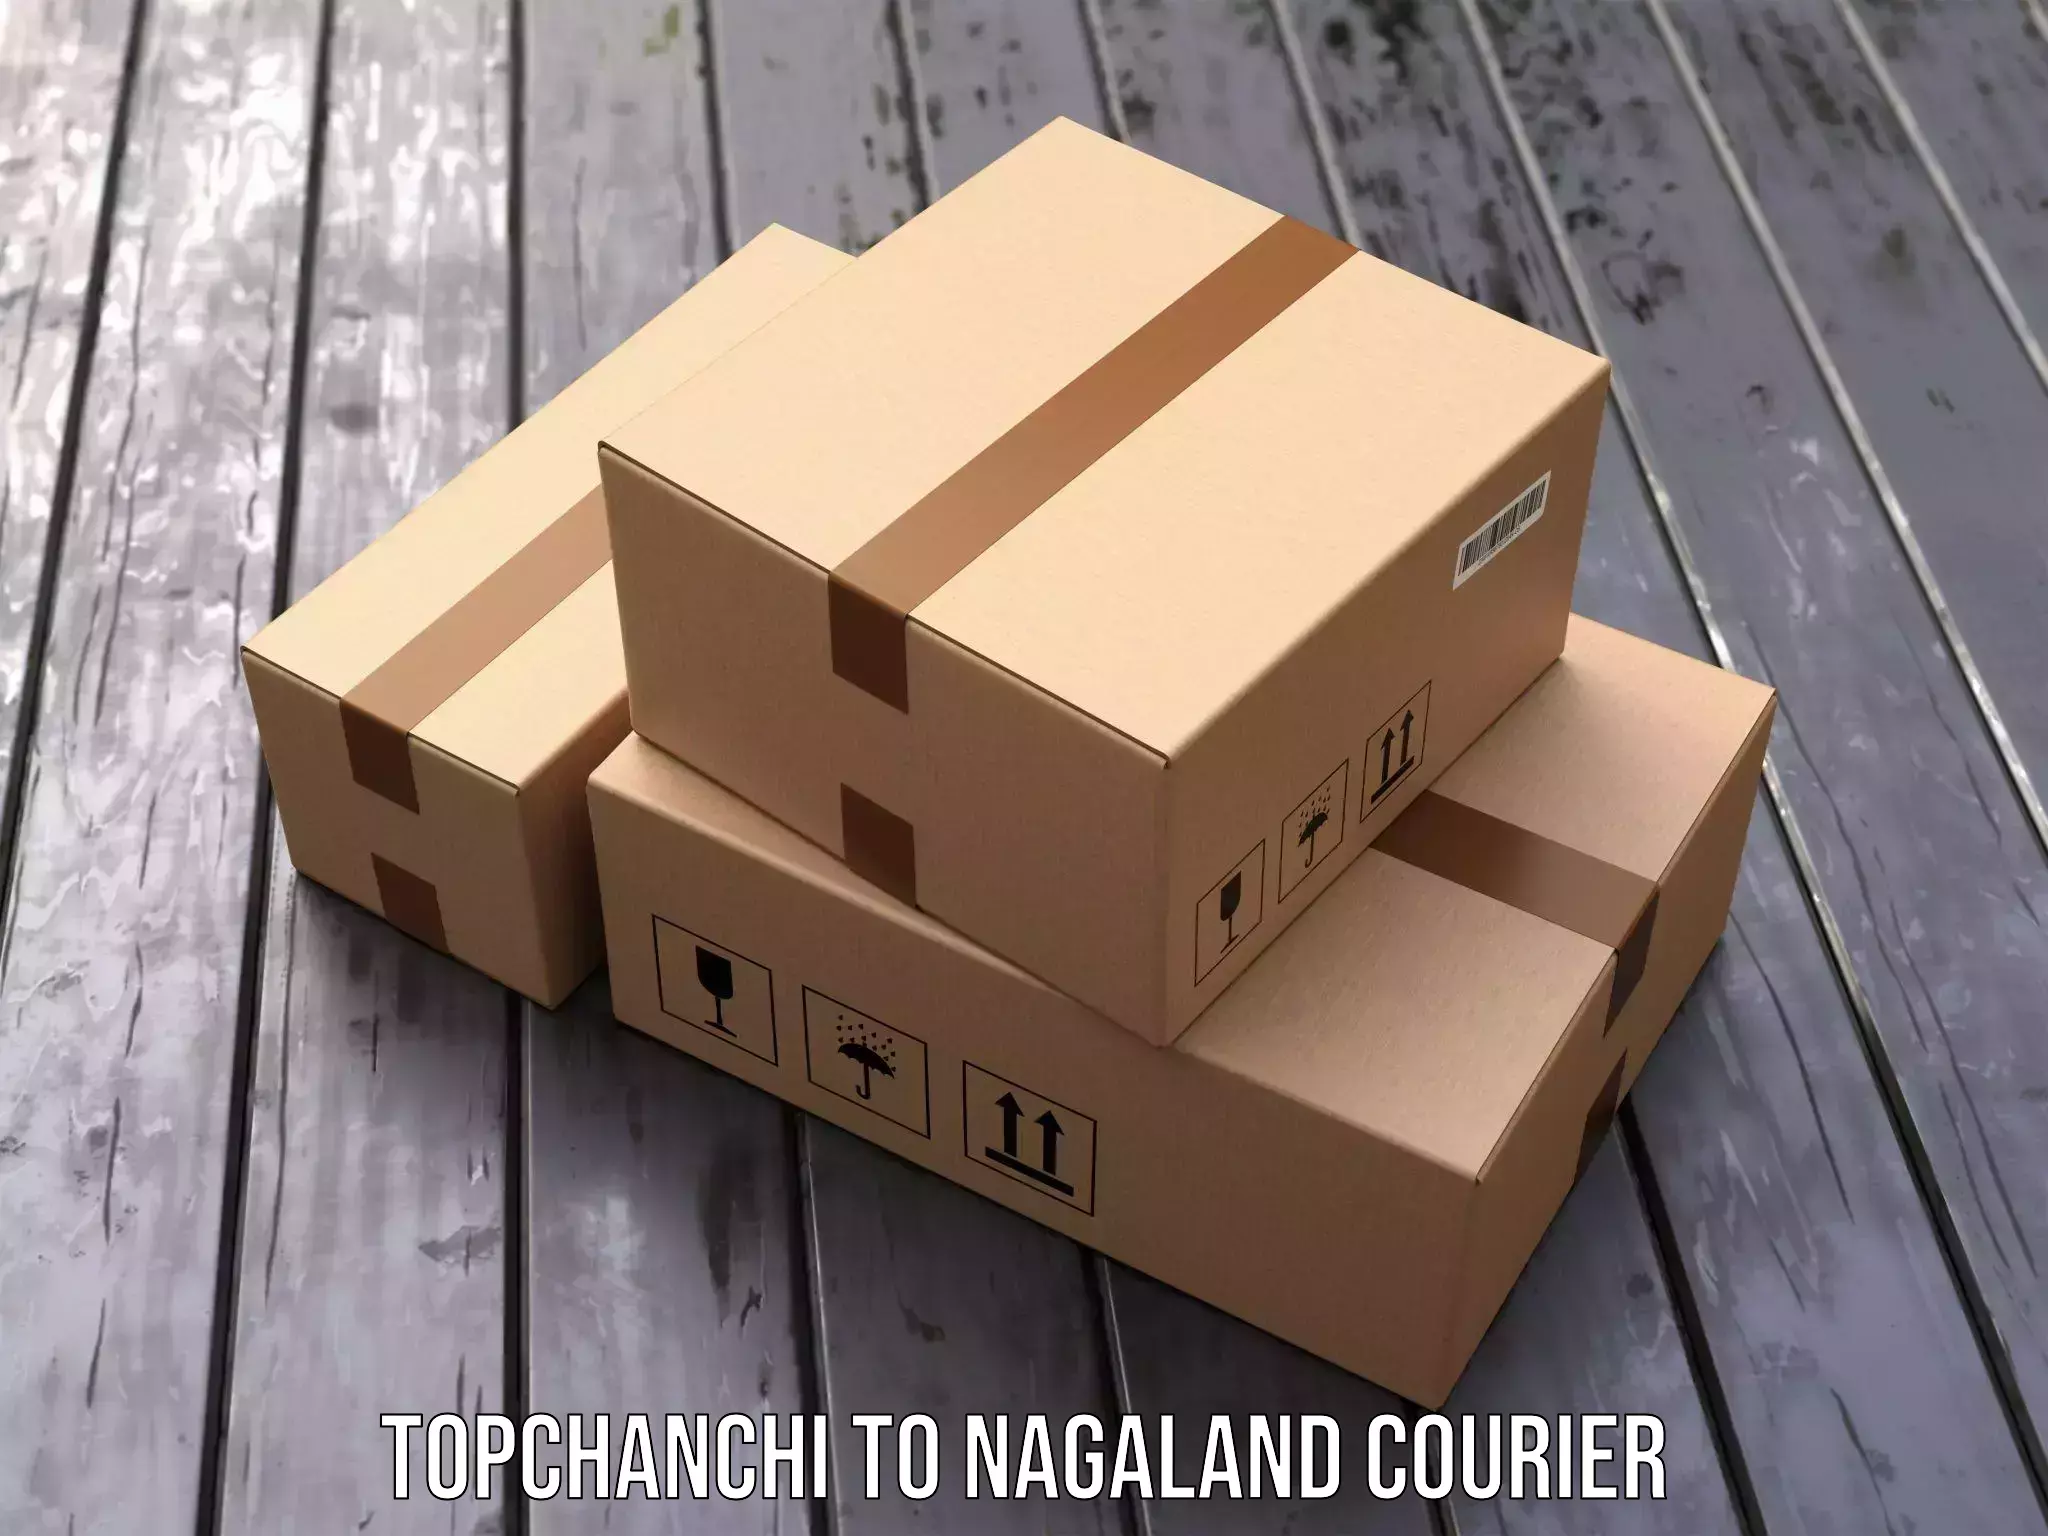 State-of-the-art courier technology Topchanchi to Phek